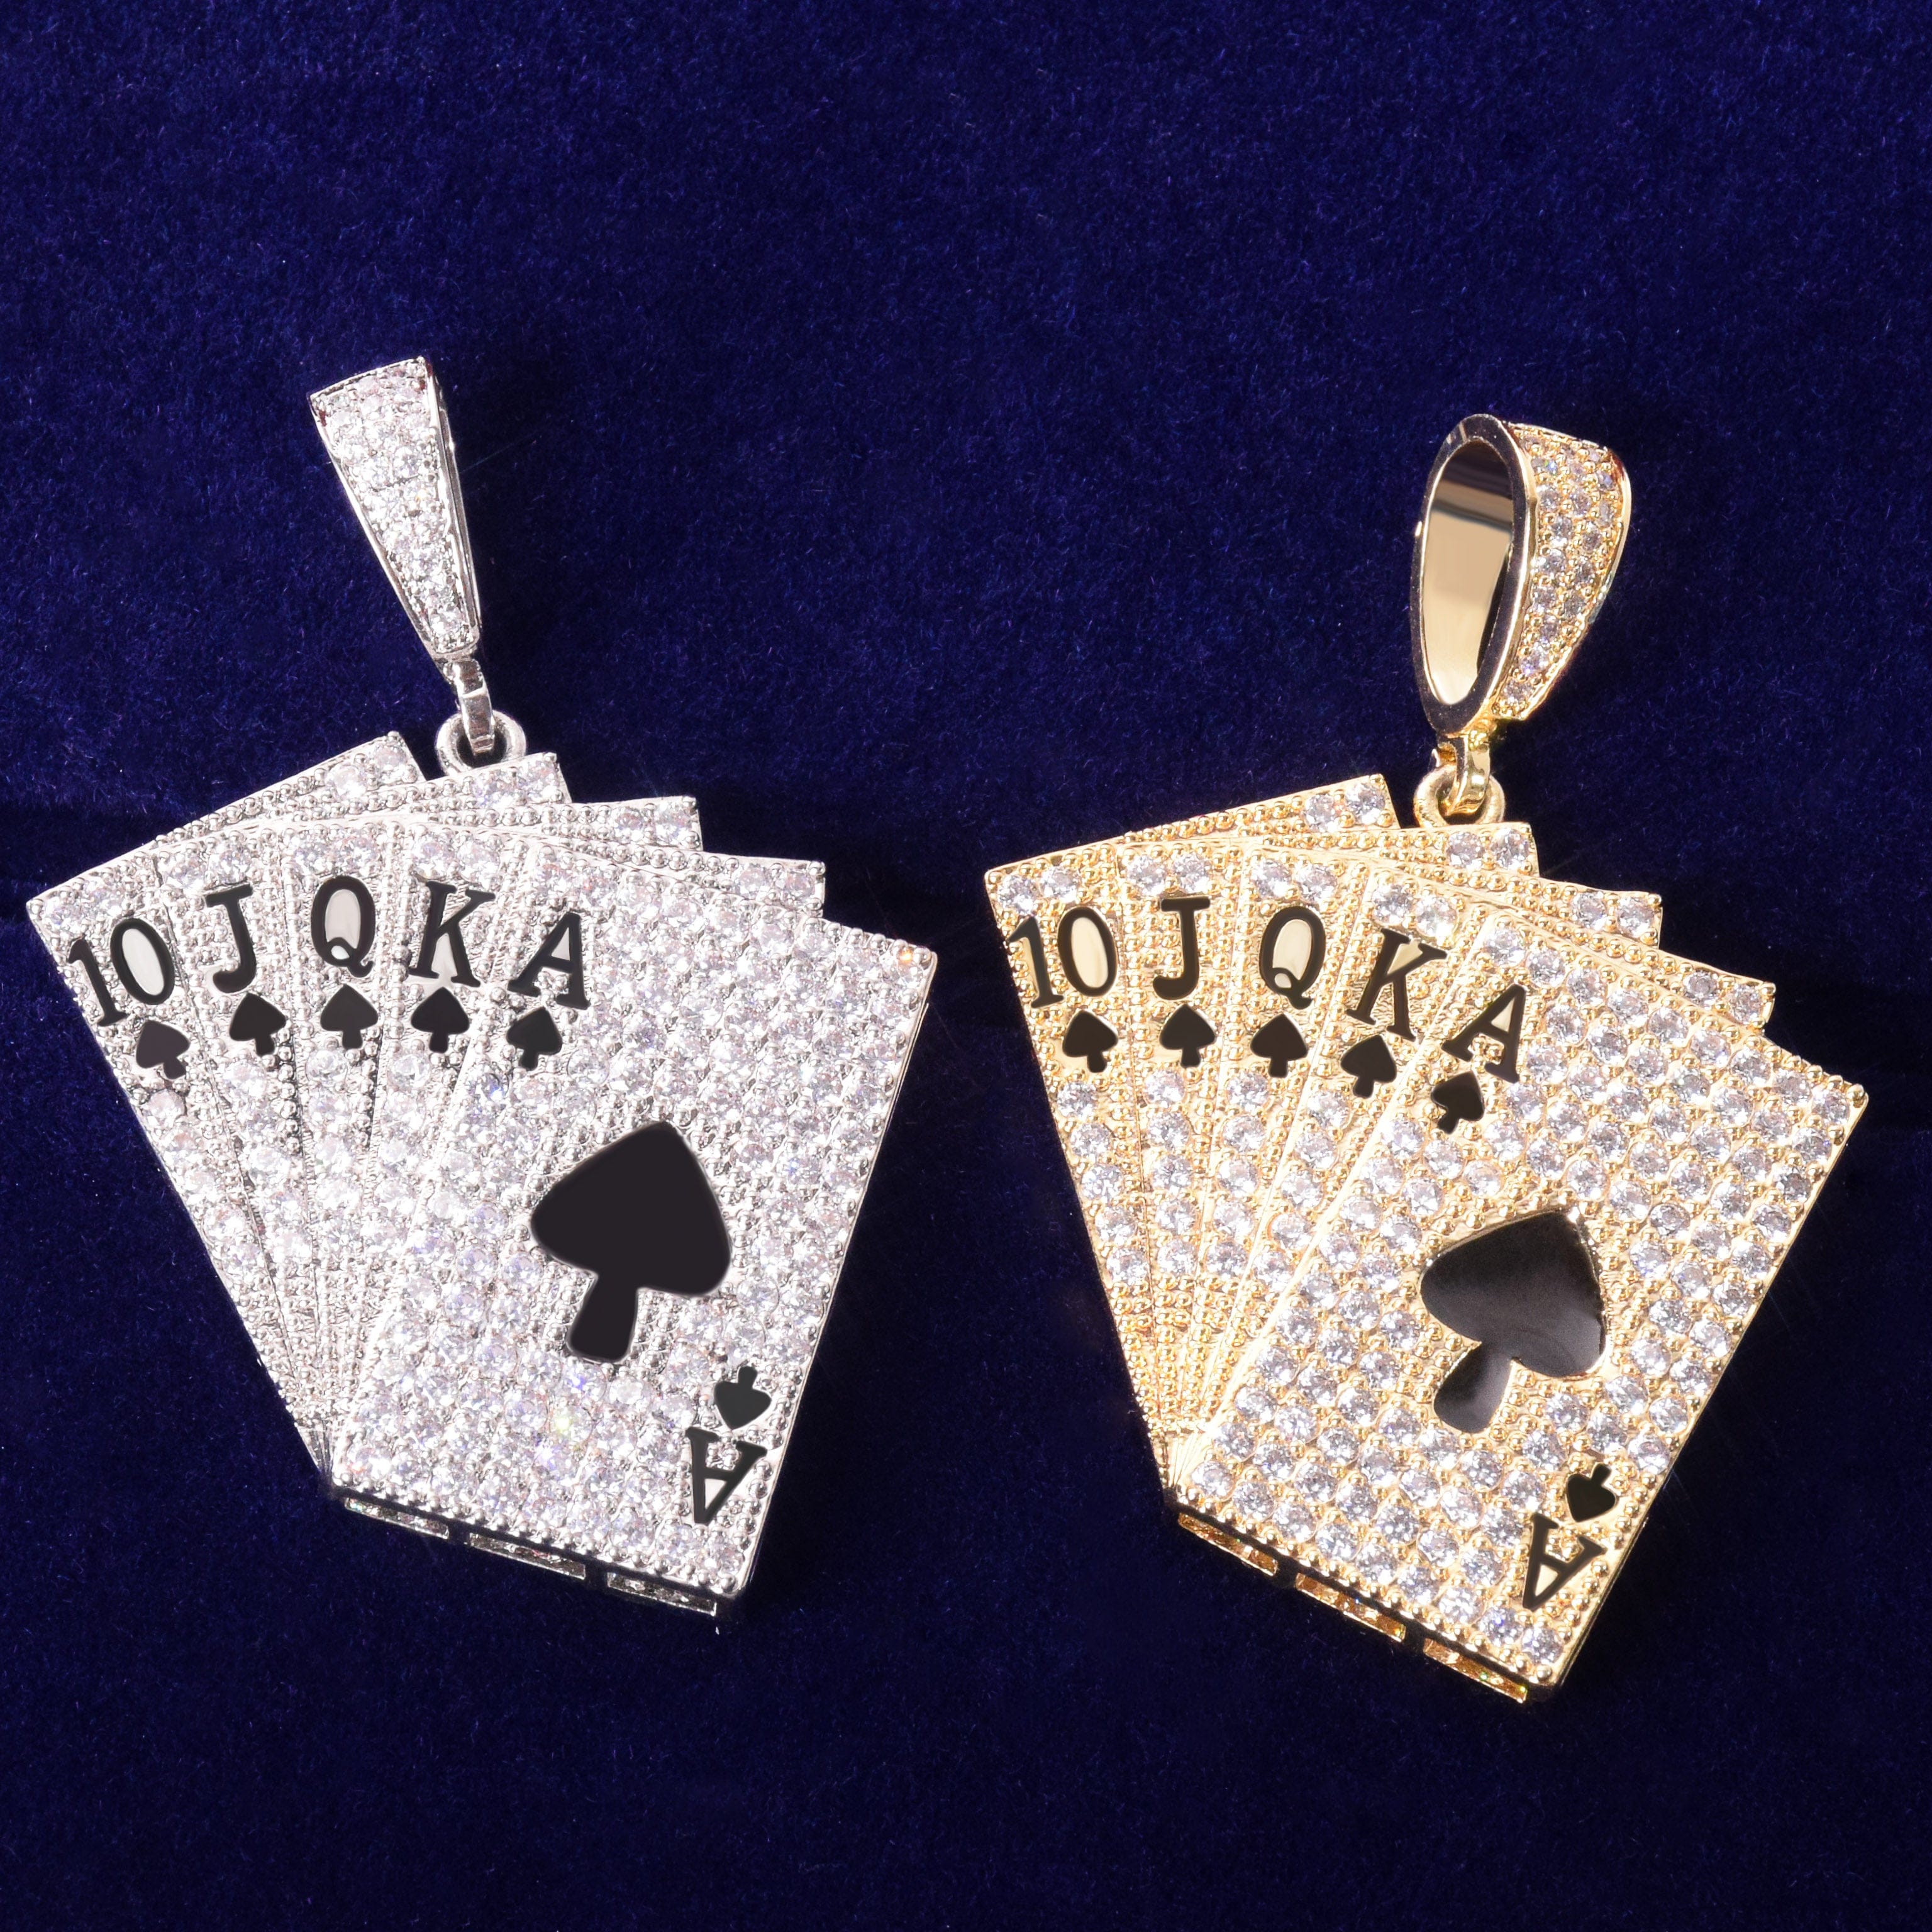 VVS Jewelry hip hop jewelry Gold/Silver Poker Card Bling Chain